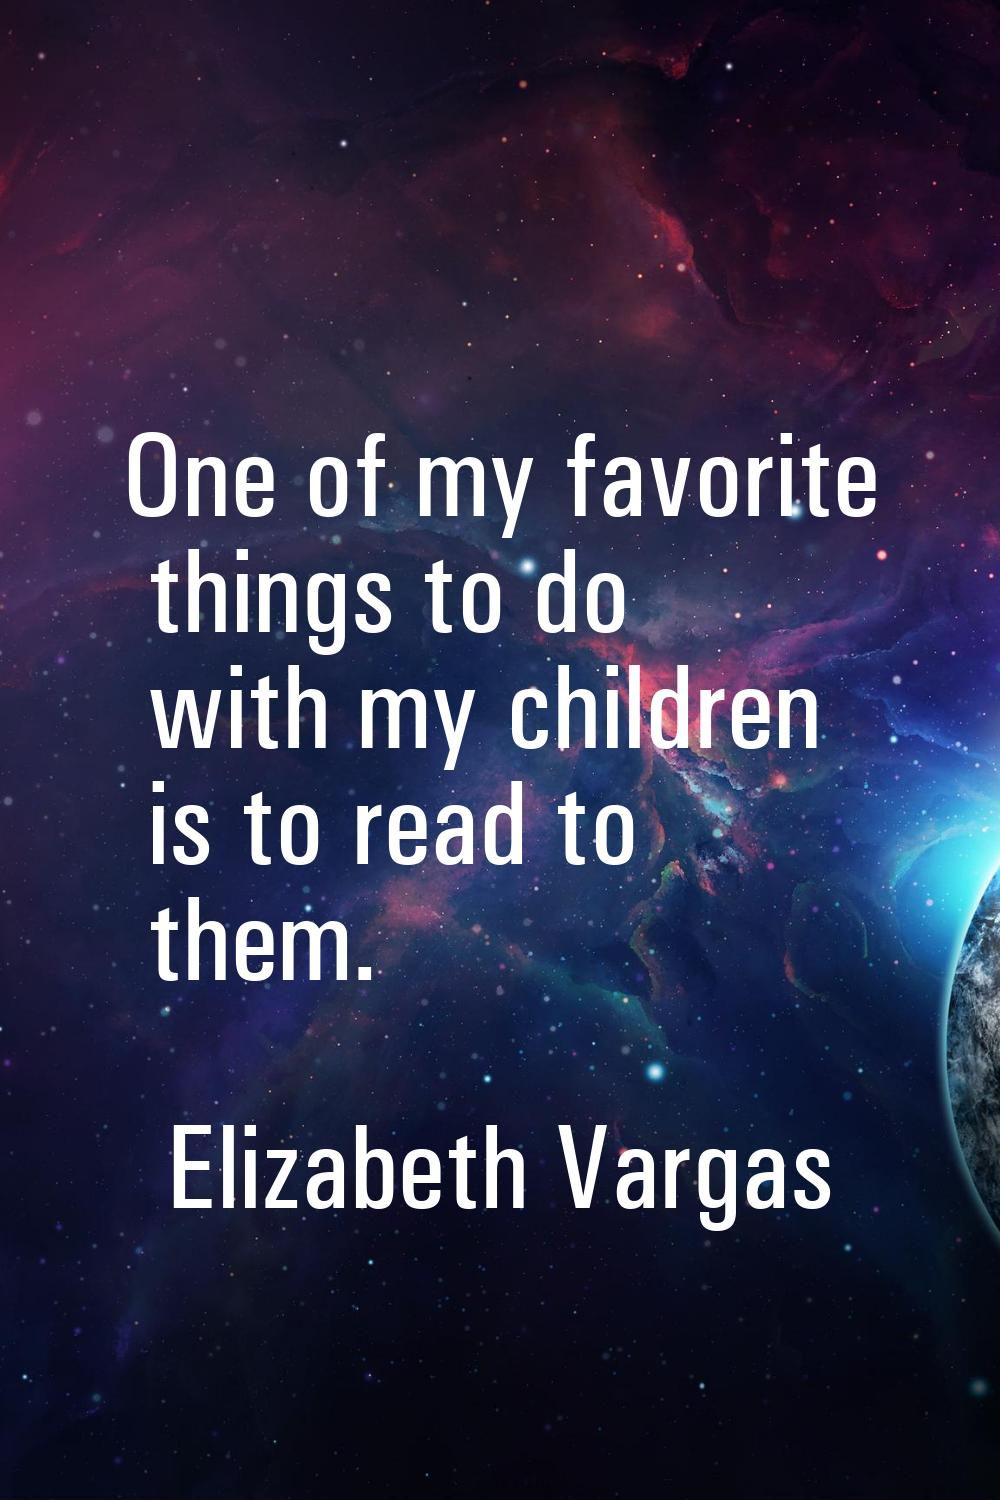 One of my favorite things to do with my children is to read to them.